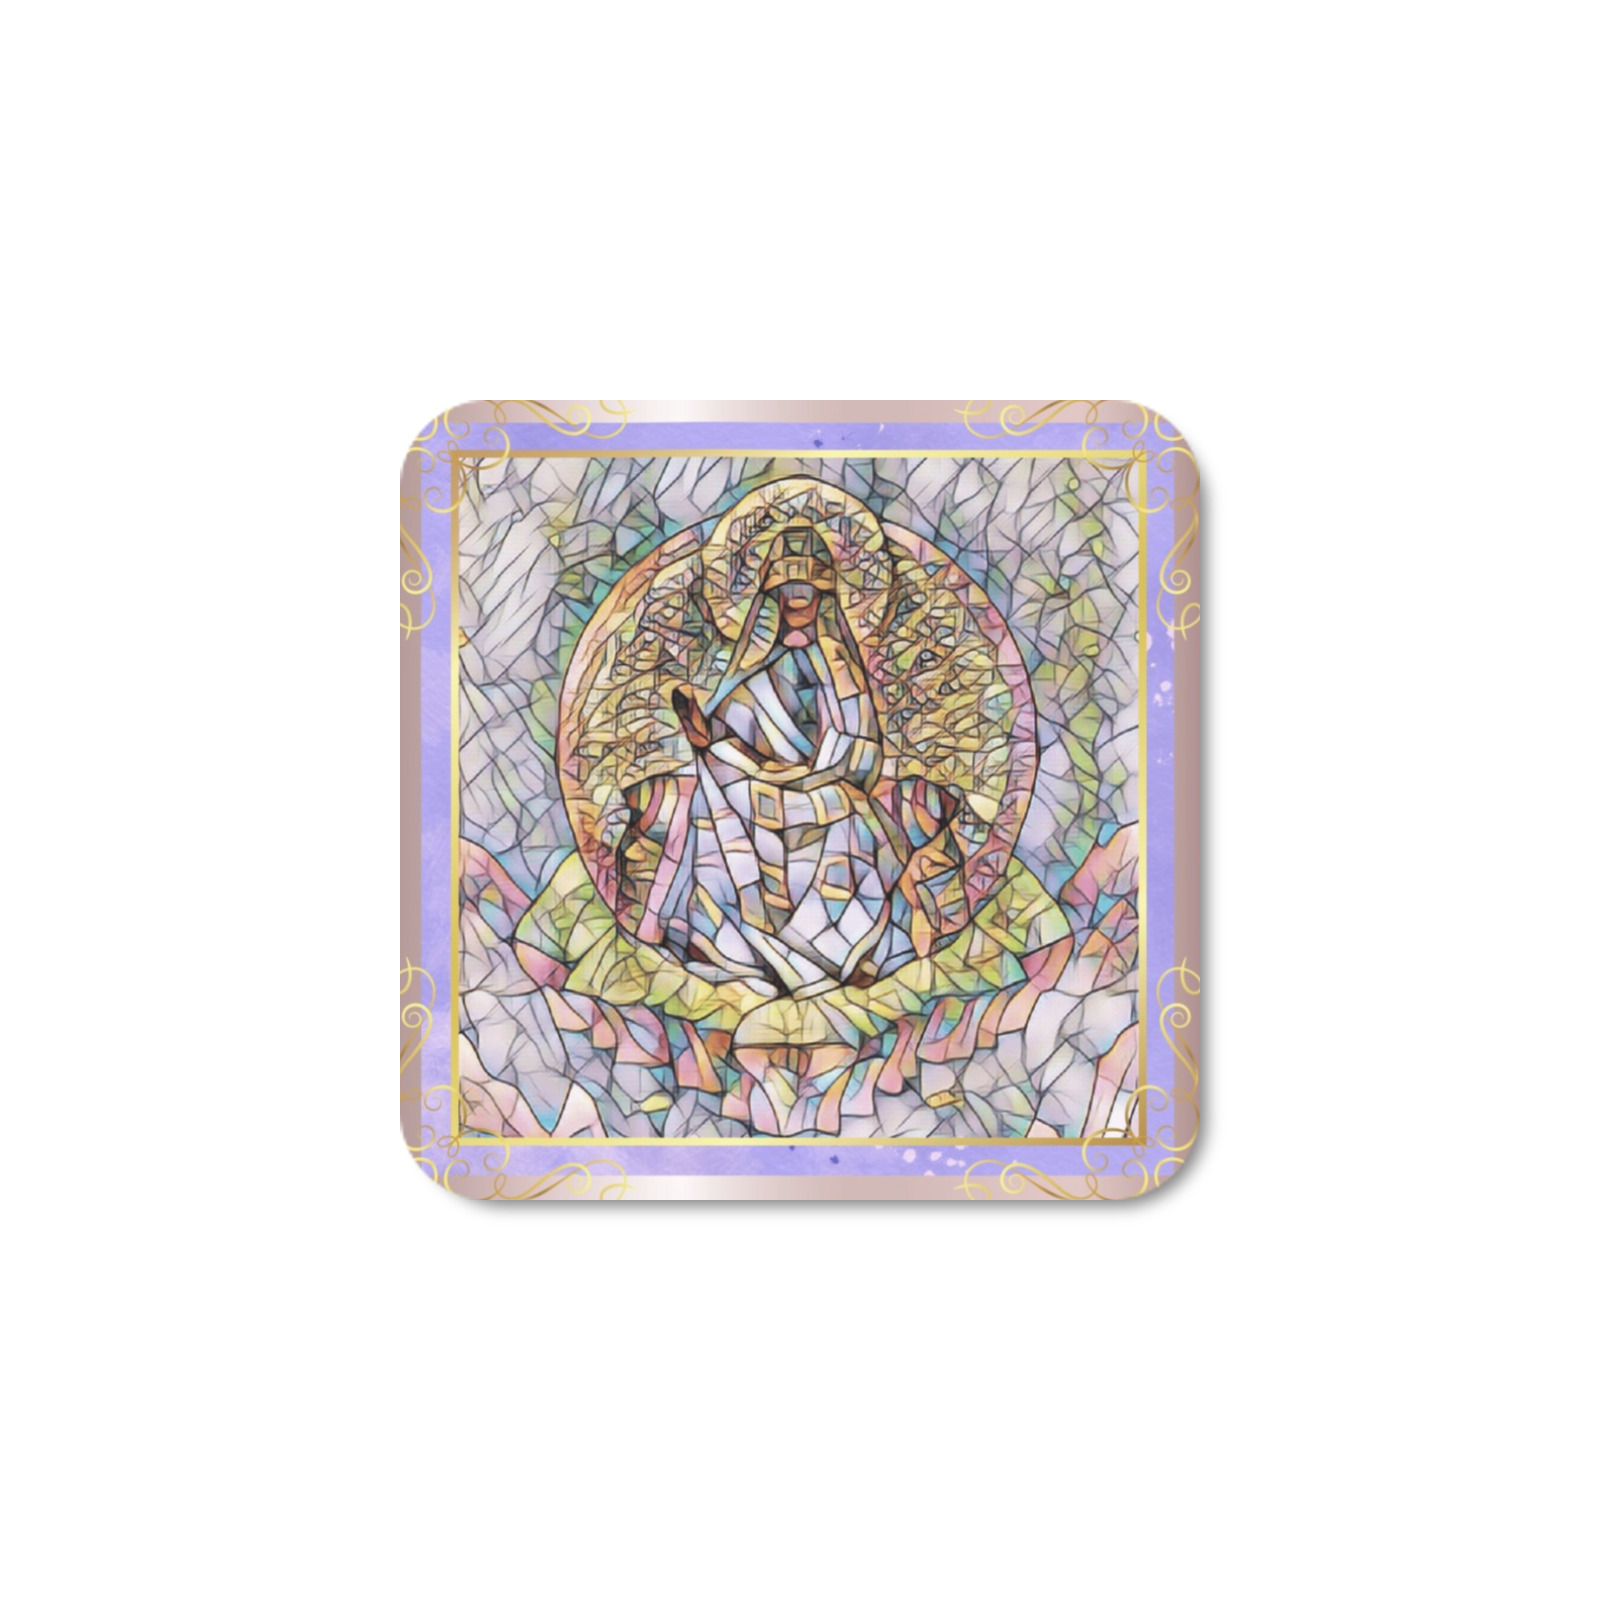 Second Remastered Version of Mother of The World in Warmer Colors by Nicholas Roerich Square Fridge Magnet